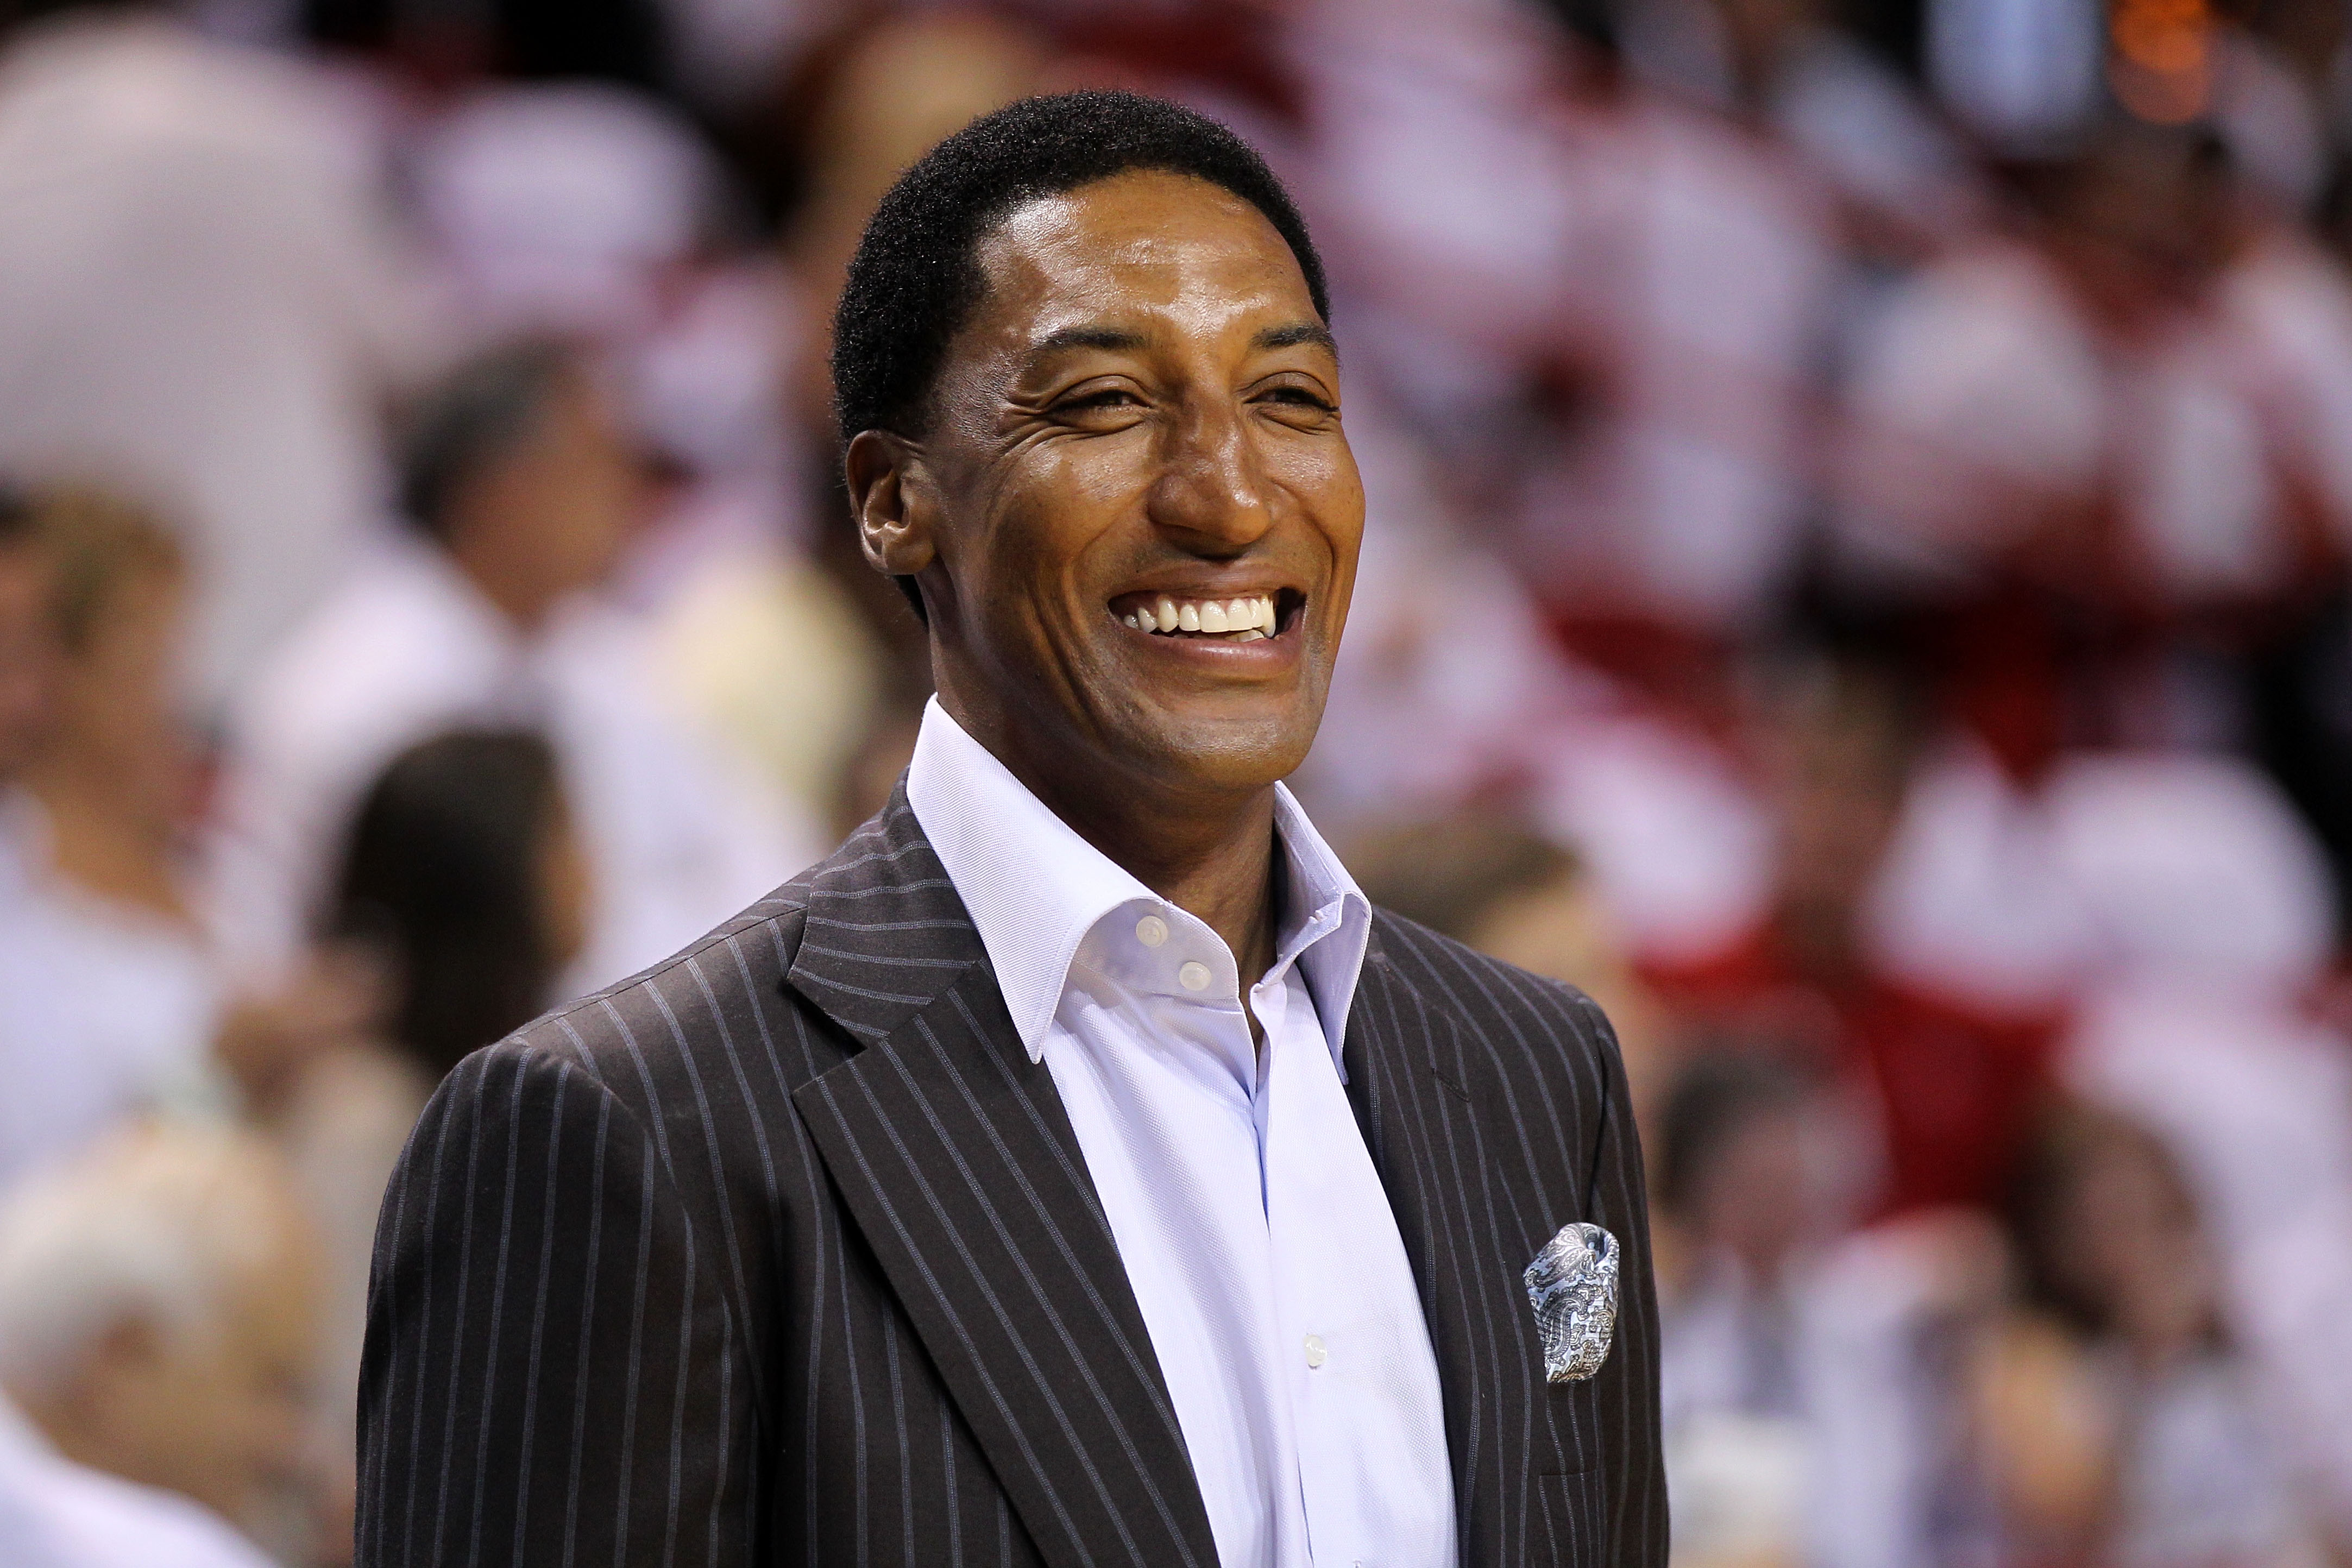 MIAMI, FL - MAY 22:  Former Chicago Bull Scottie Pippen looks on as the Chicago Bulls play against the Miami Heat in Game Three of the Eastern Conference Finals during the 2011 NBA Playoffs on May 22, 2011 at American Airlines Arena in Miami, Florida.  NO